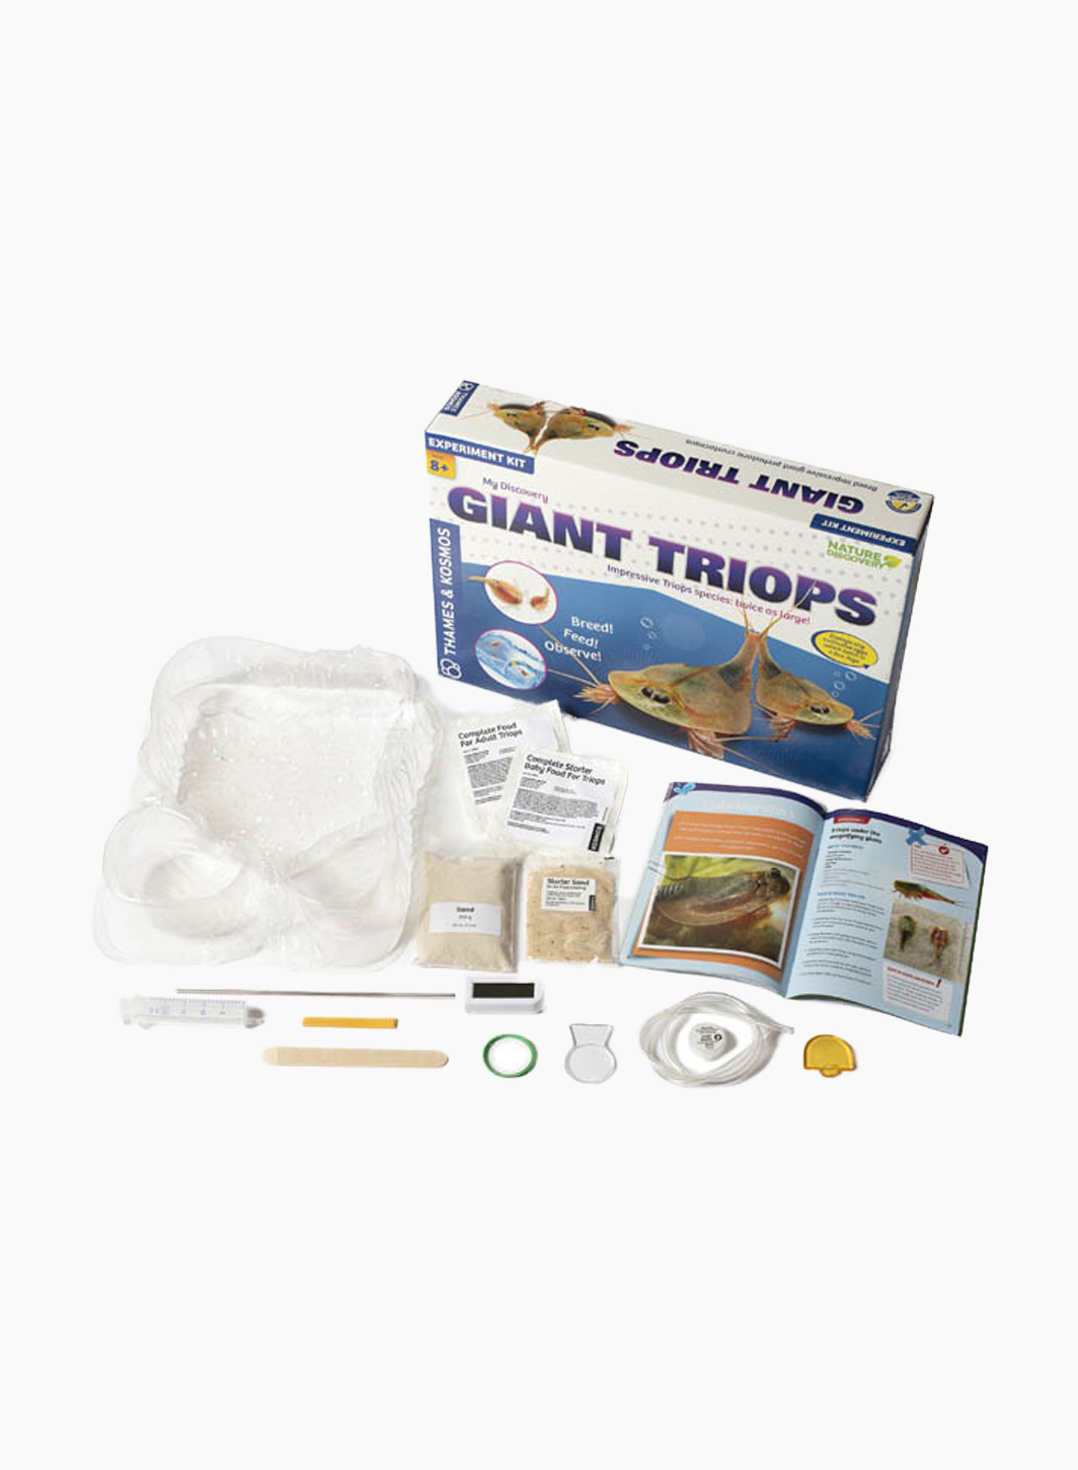 THAMES & KOSMOS Educational Game My Discovery Giant Triops